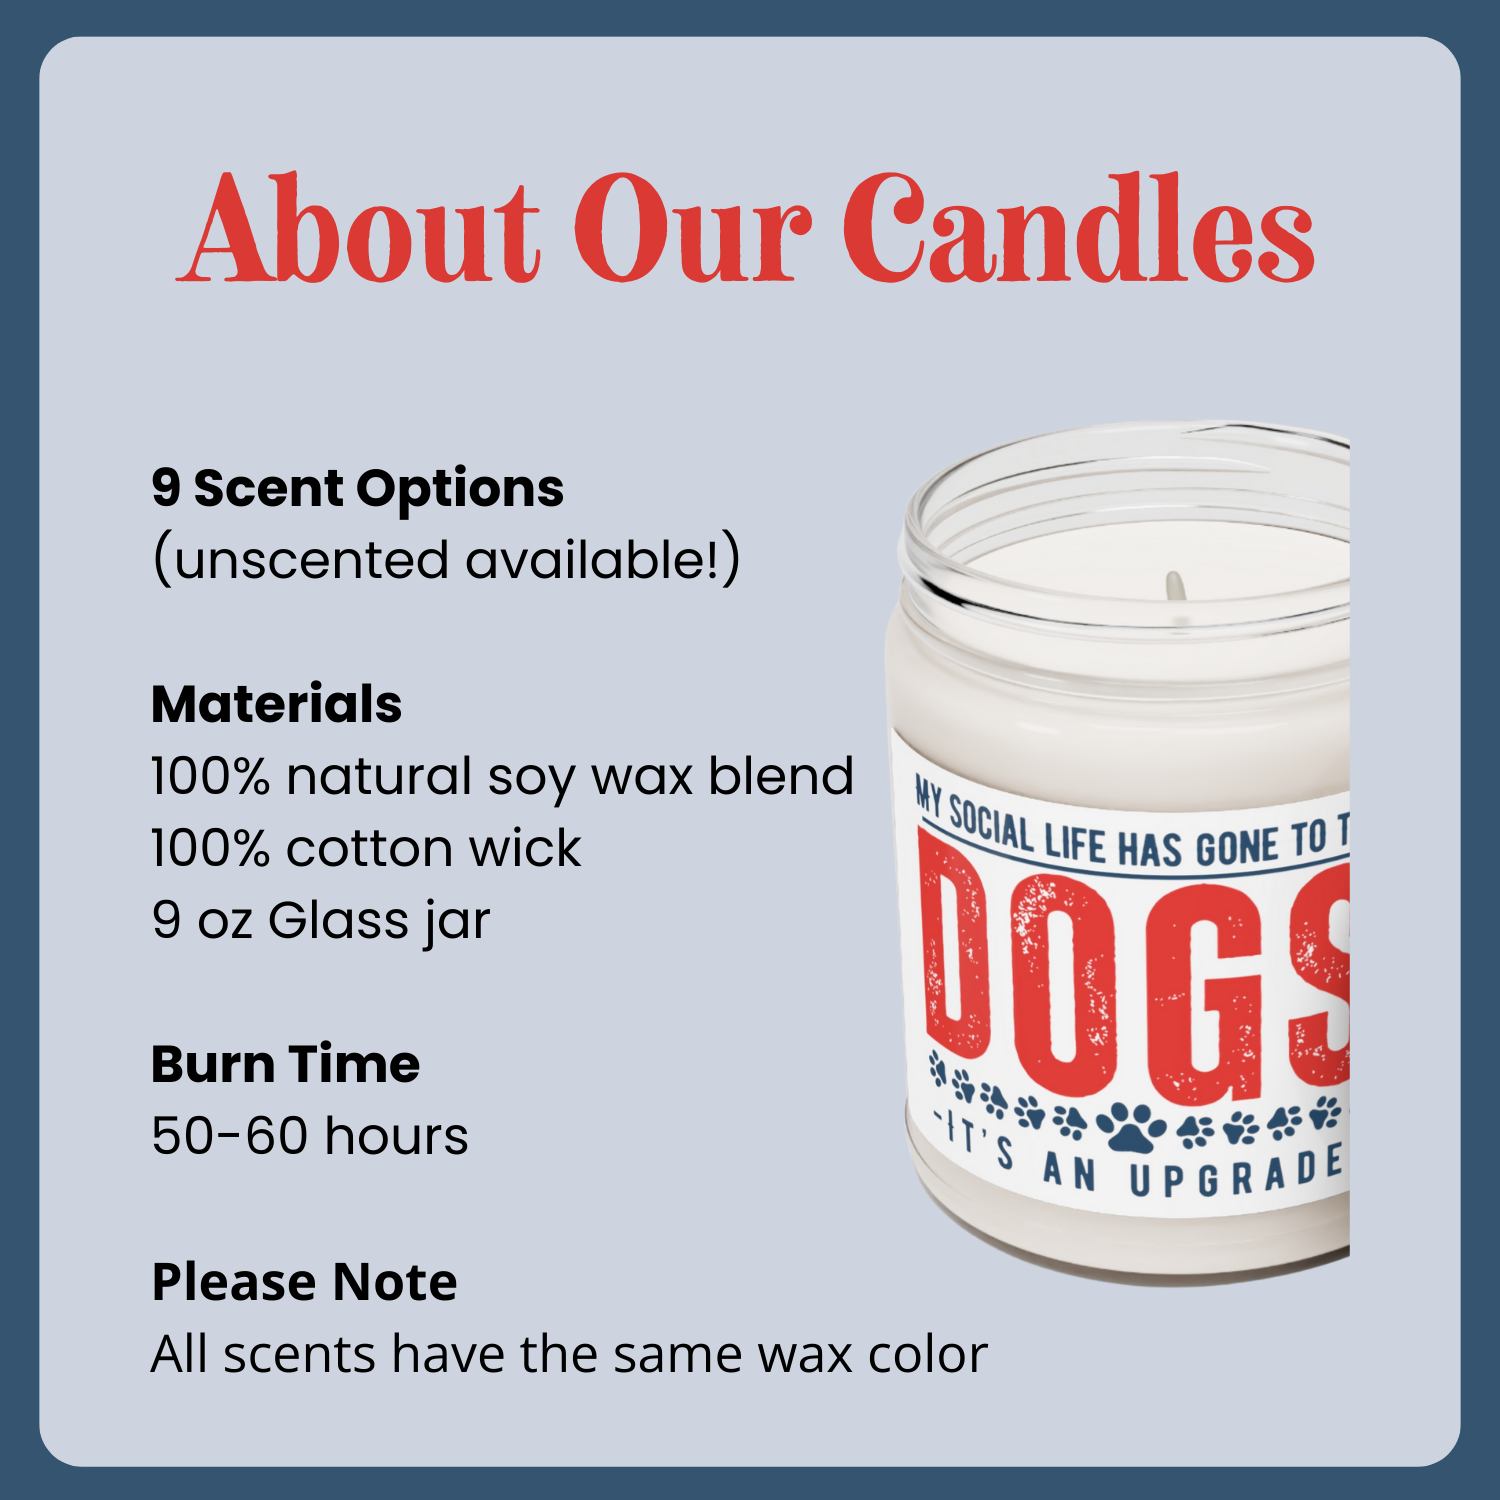 50-60 hour burn time, 100% natural soy wax blend, all scents have the same white wax color